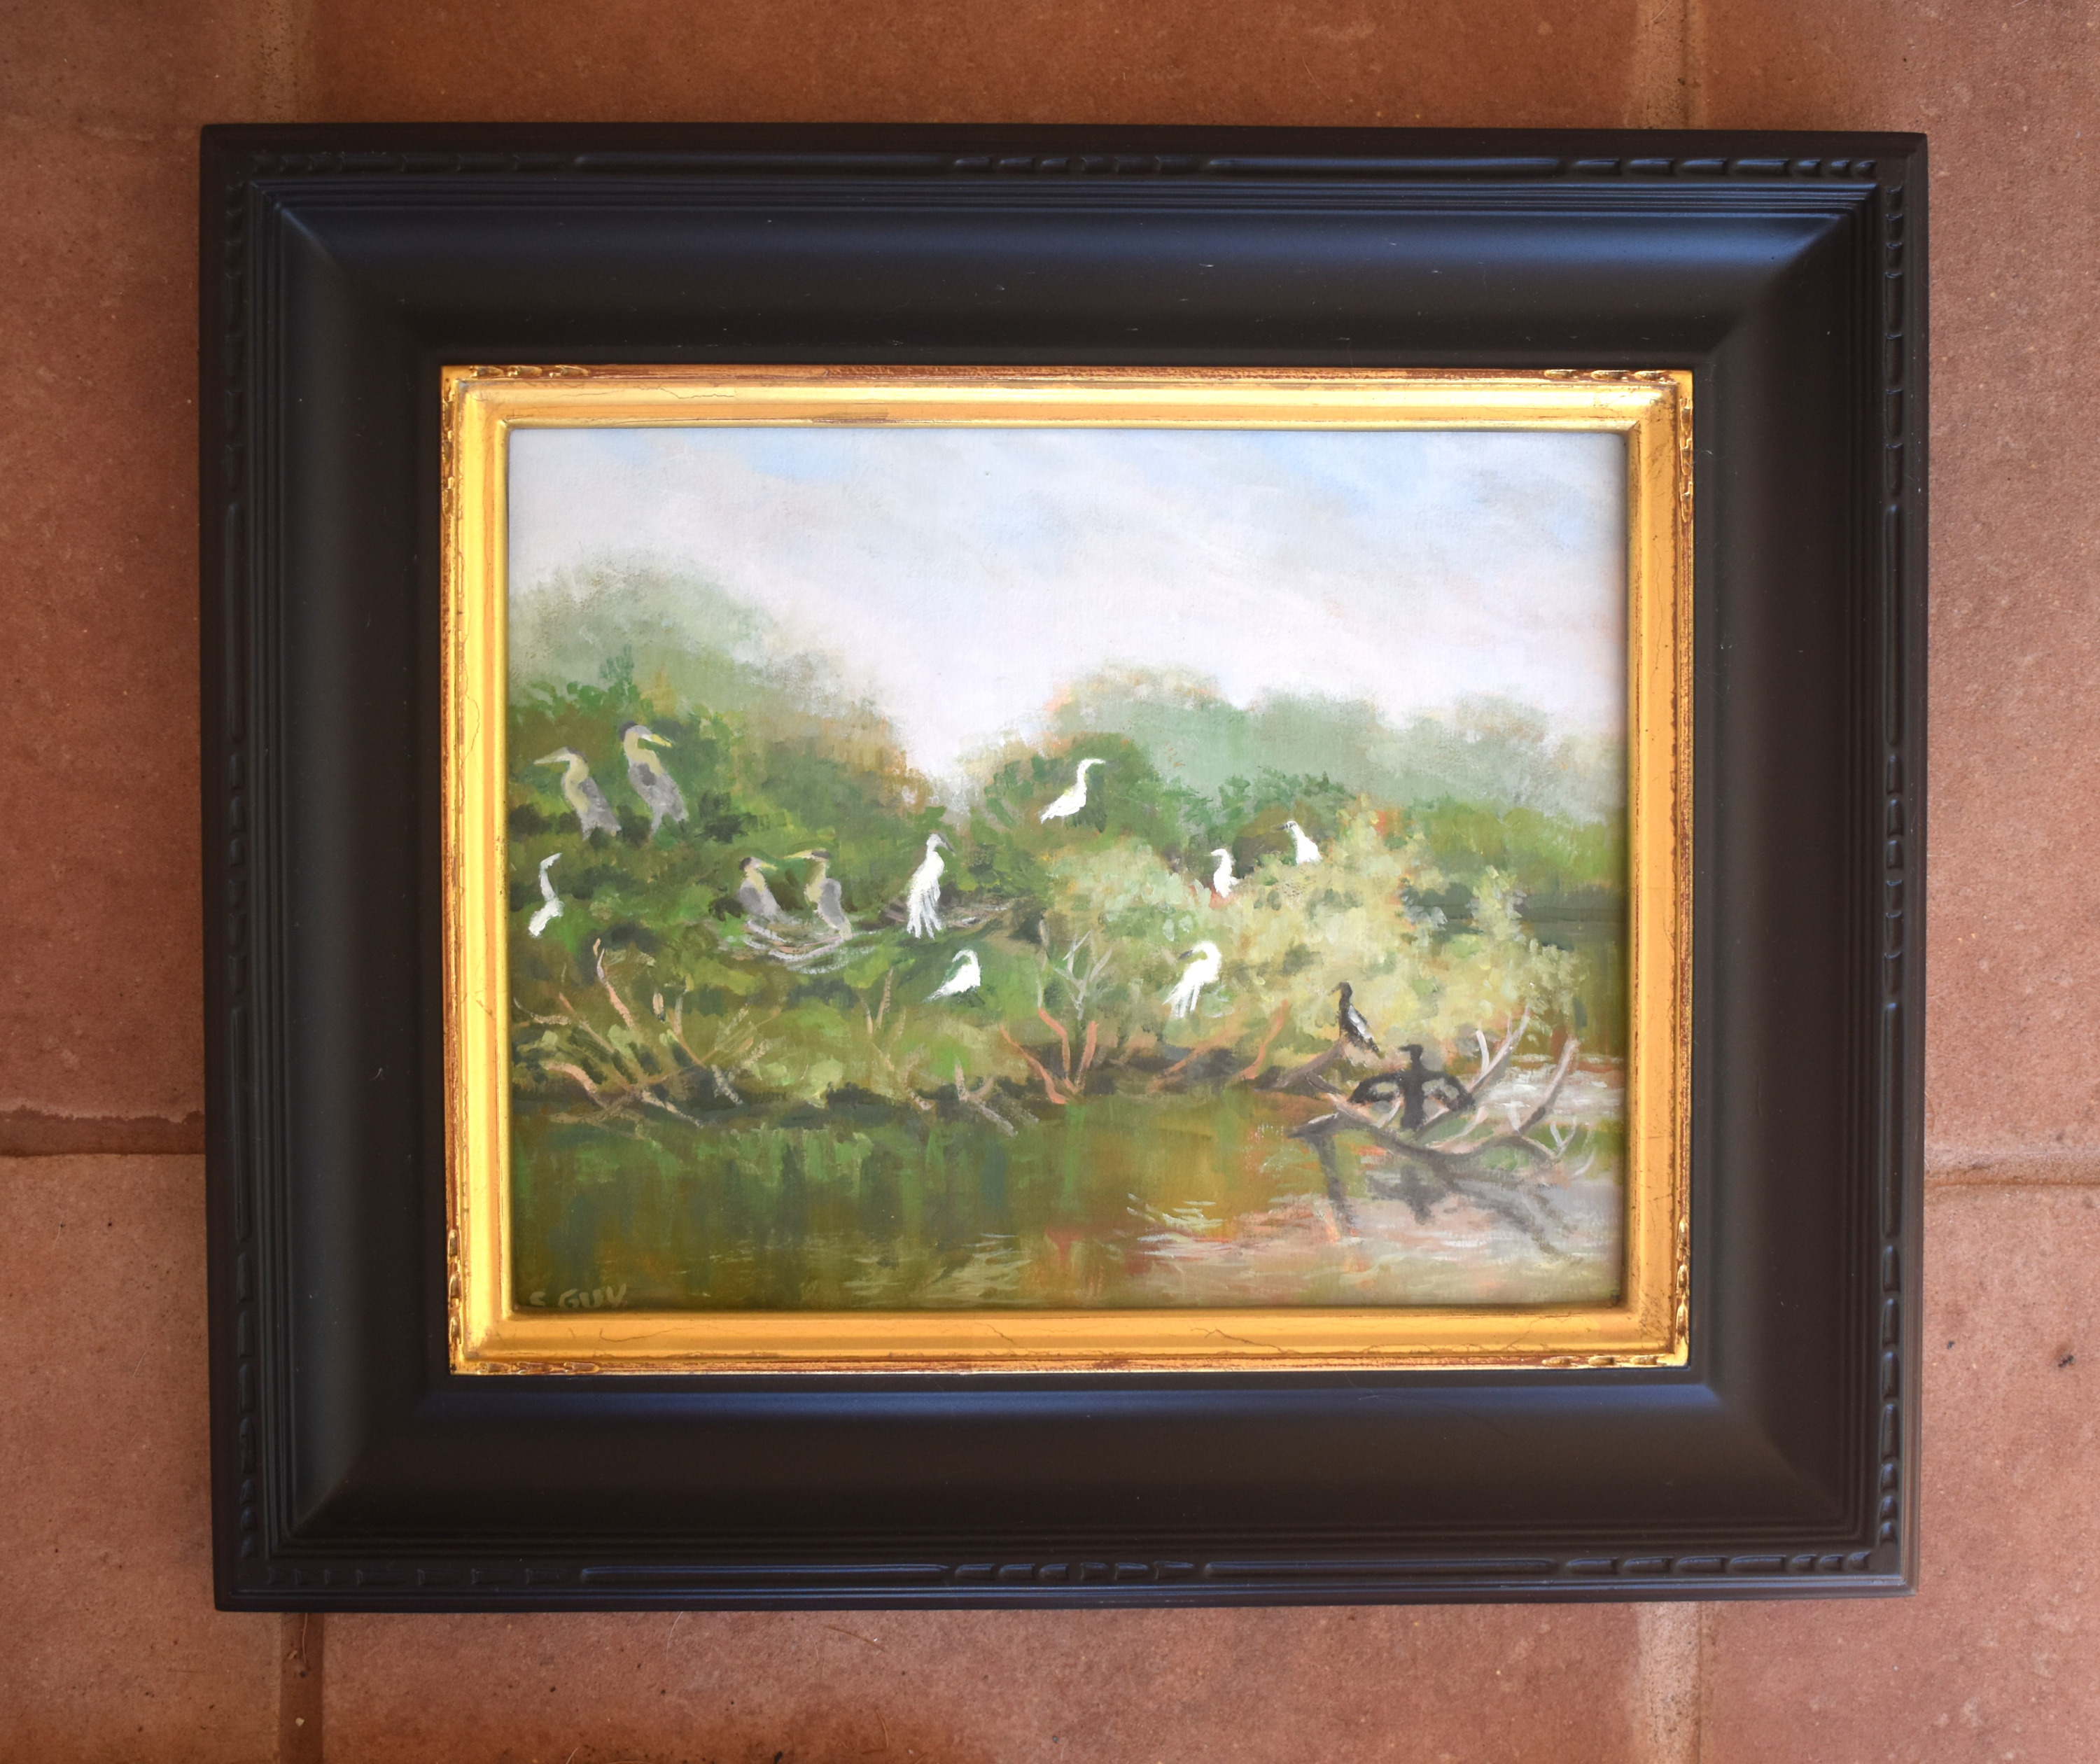 The rookery framed plein air oil painting ododwh